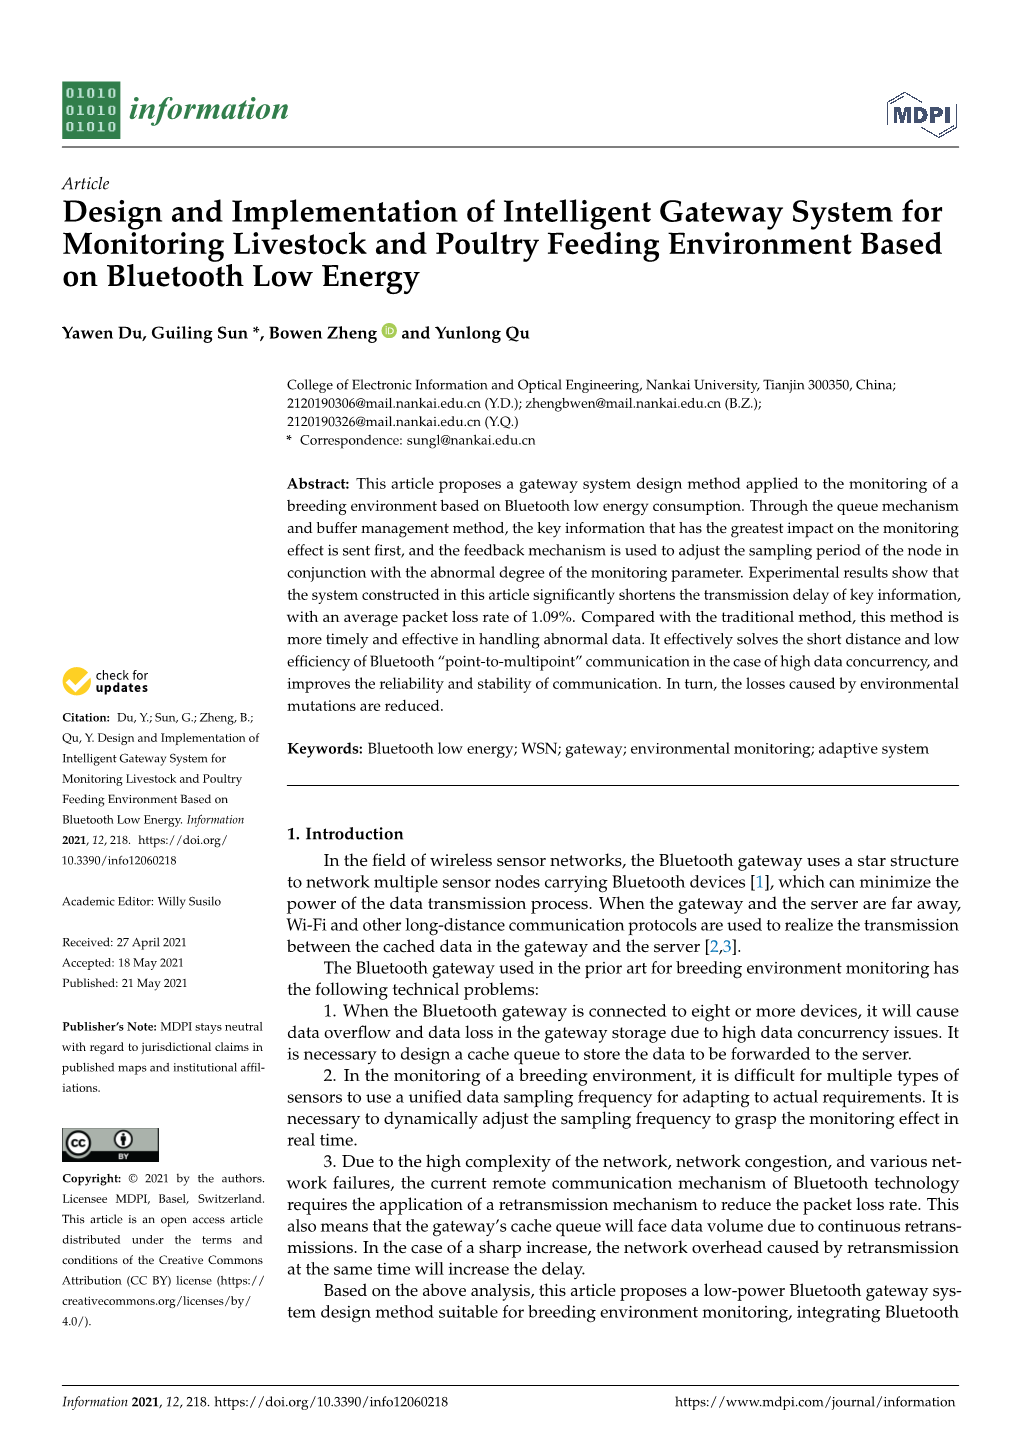 Design and Implementation of Intelligent Gateway System for Monitoring Livestock and Poultry Feeding Environment Based on Bluetooth Low Energy